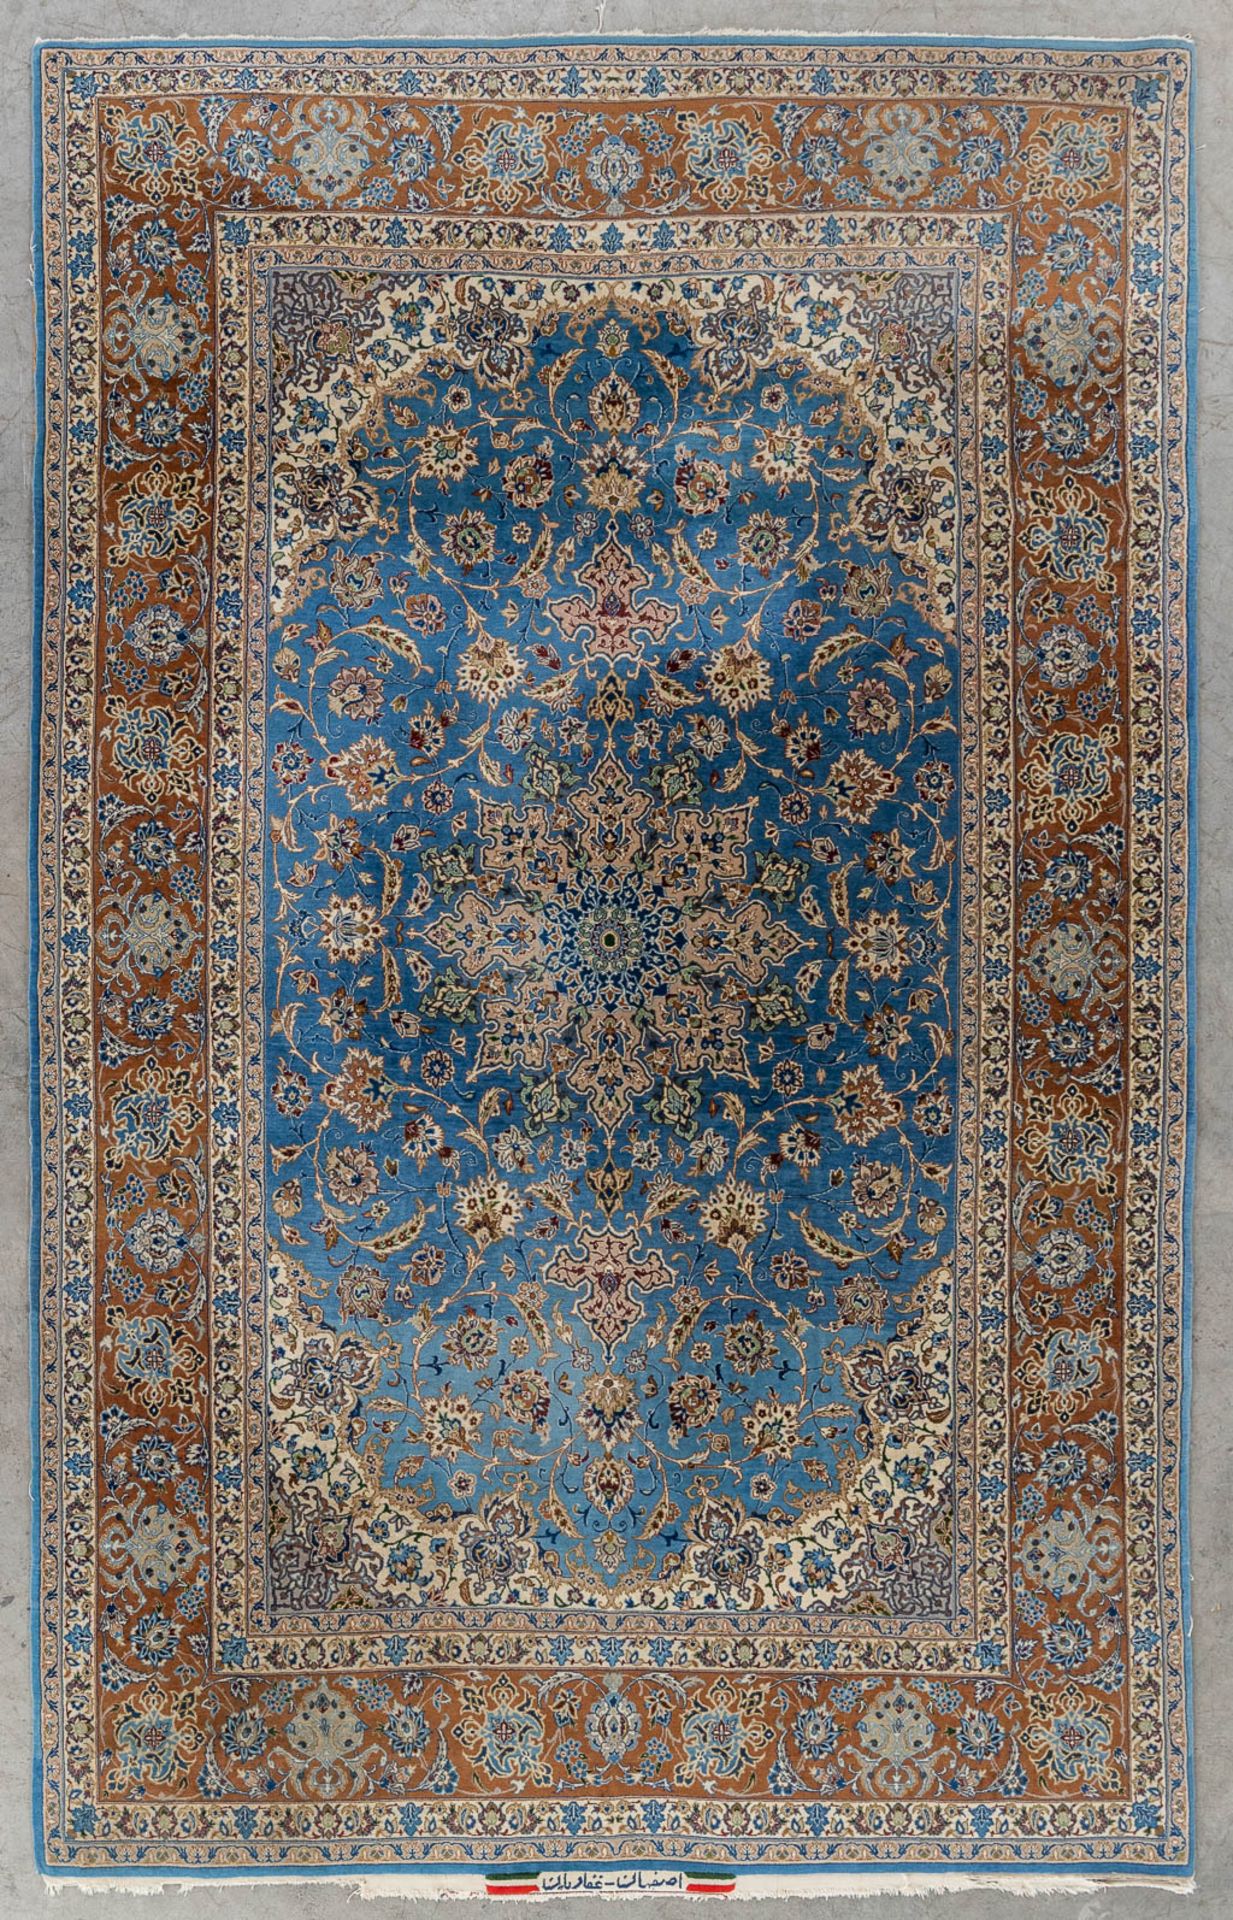 An Oriental hand-made carpet, Isfahan. Signed. (D:238 x W:150 cm)